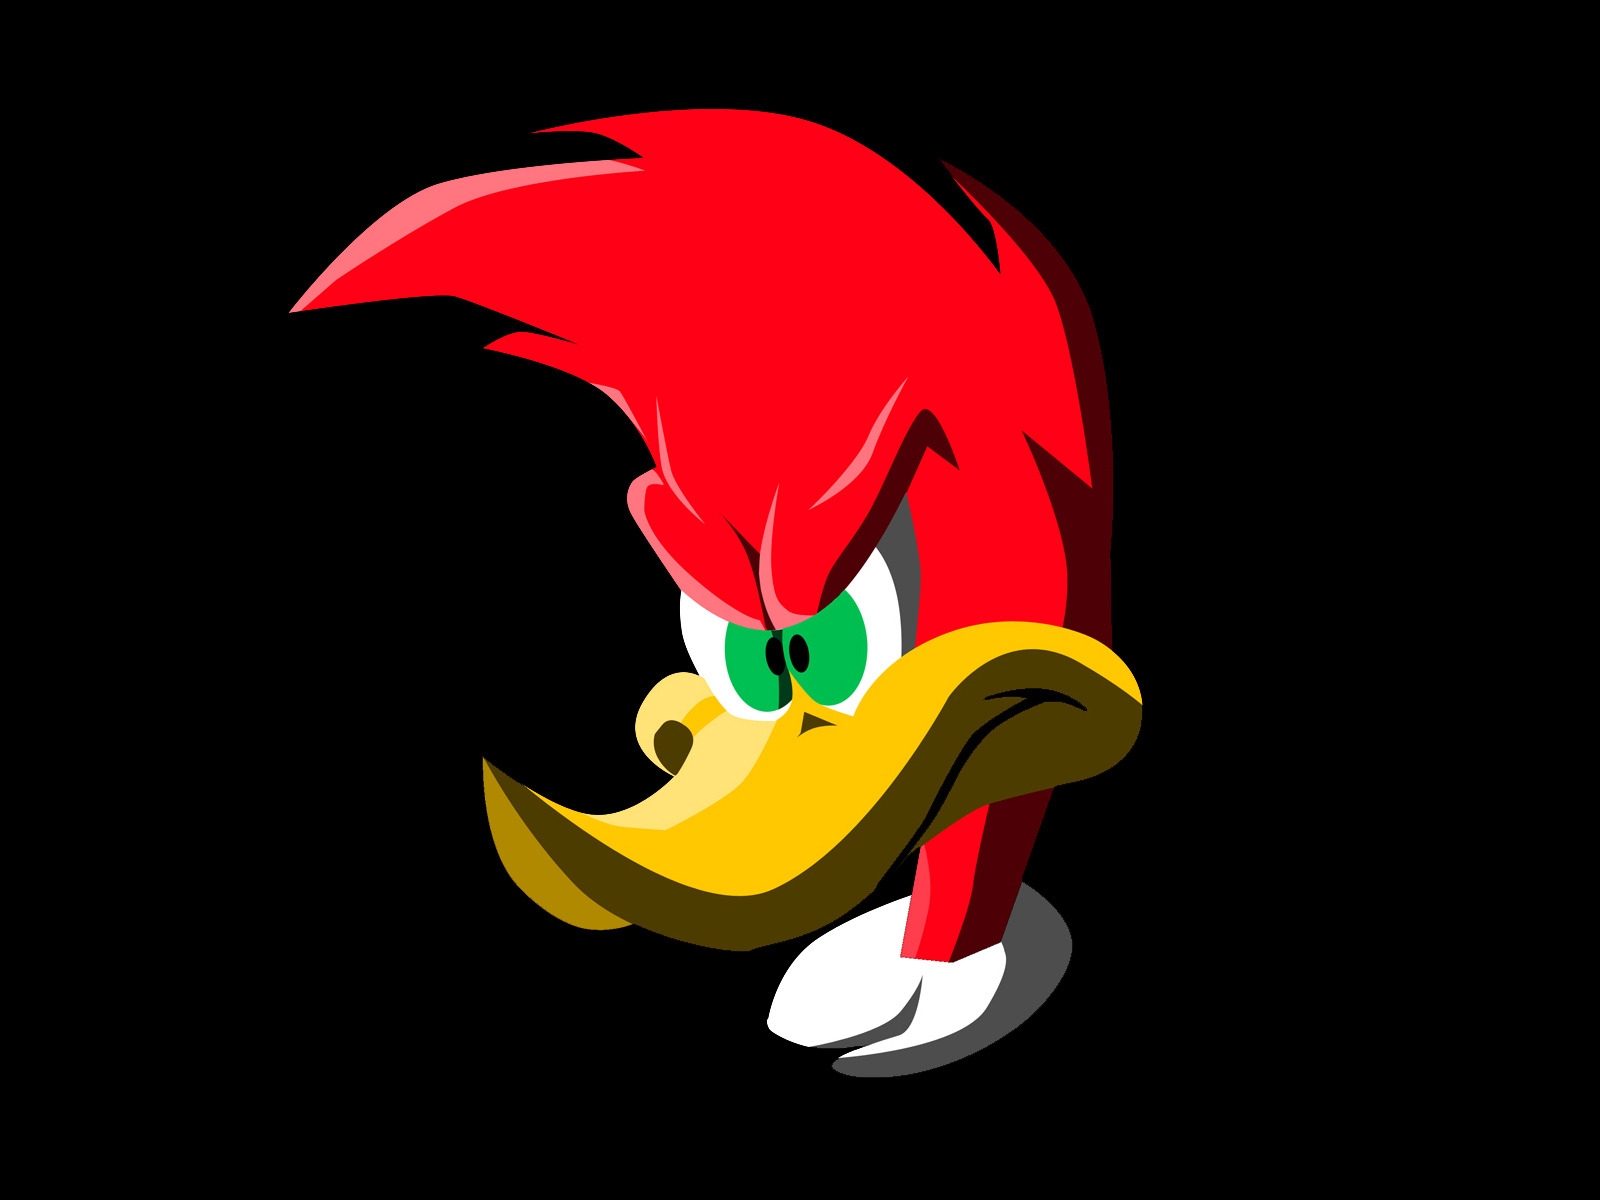 Woody Woodpecker for 1600 x 1200 resolution